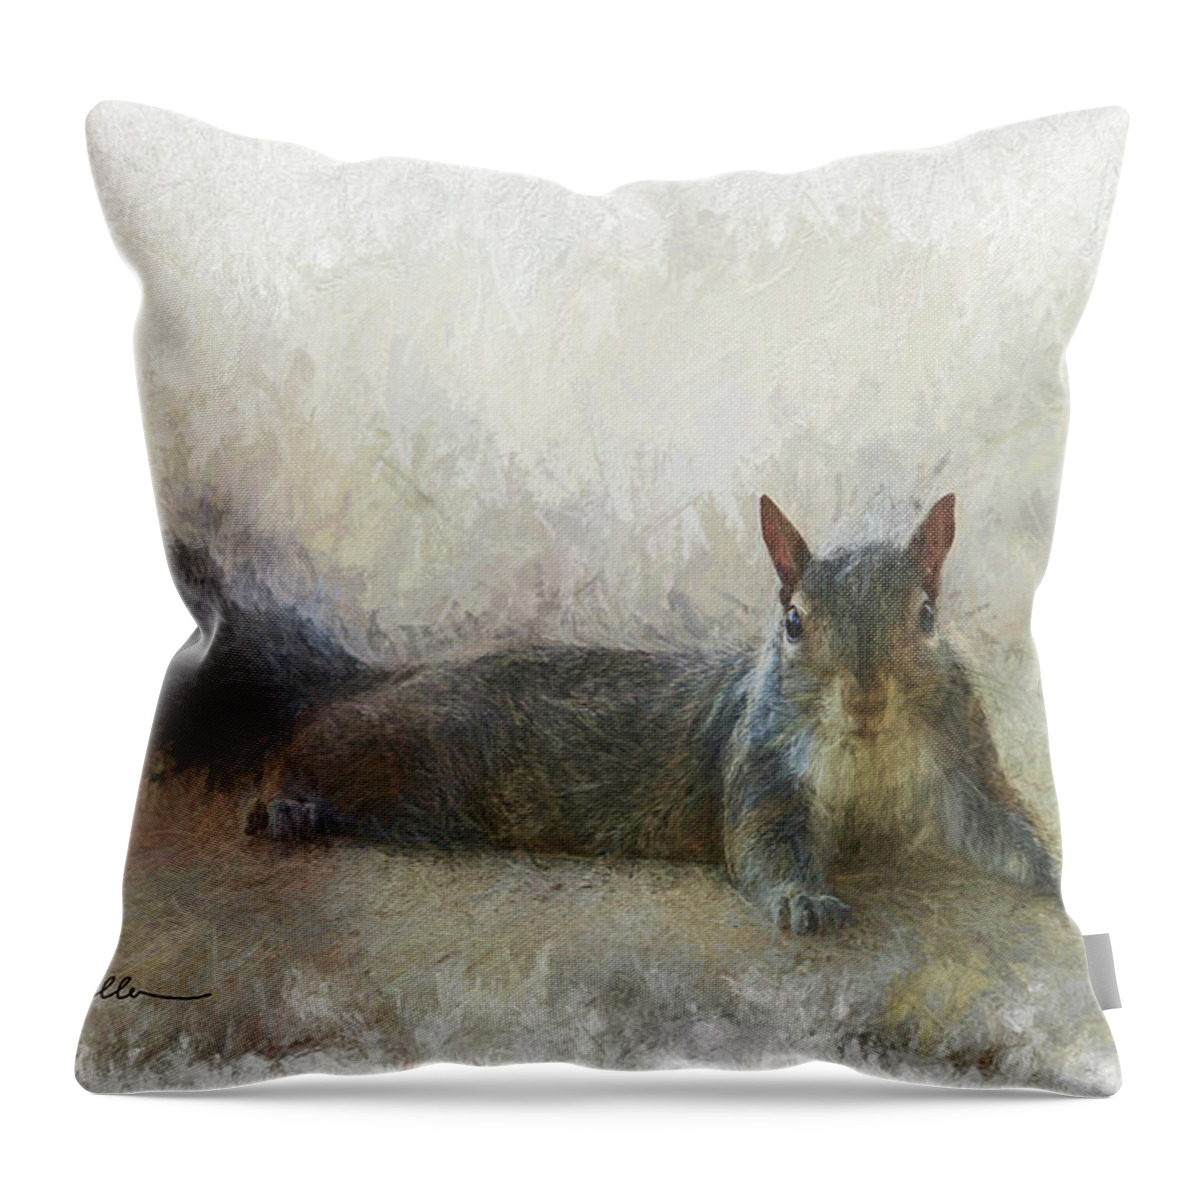 Squirrel Throw Pillow featuring the photograph Squirrel Chilling by Randall Allen